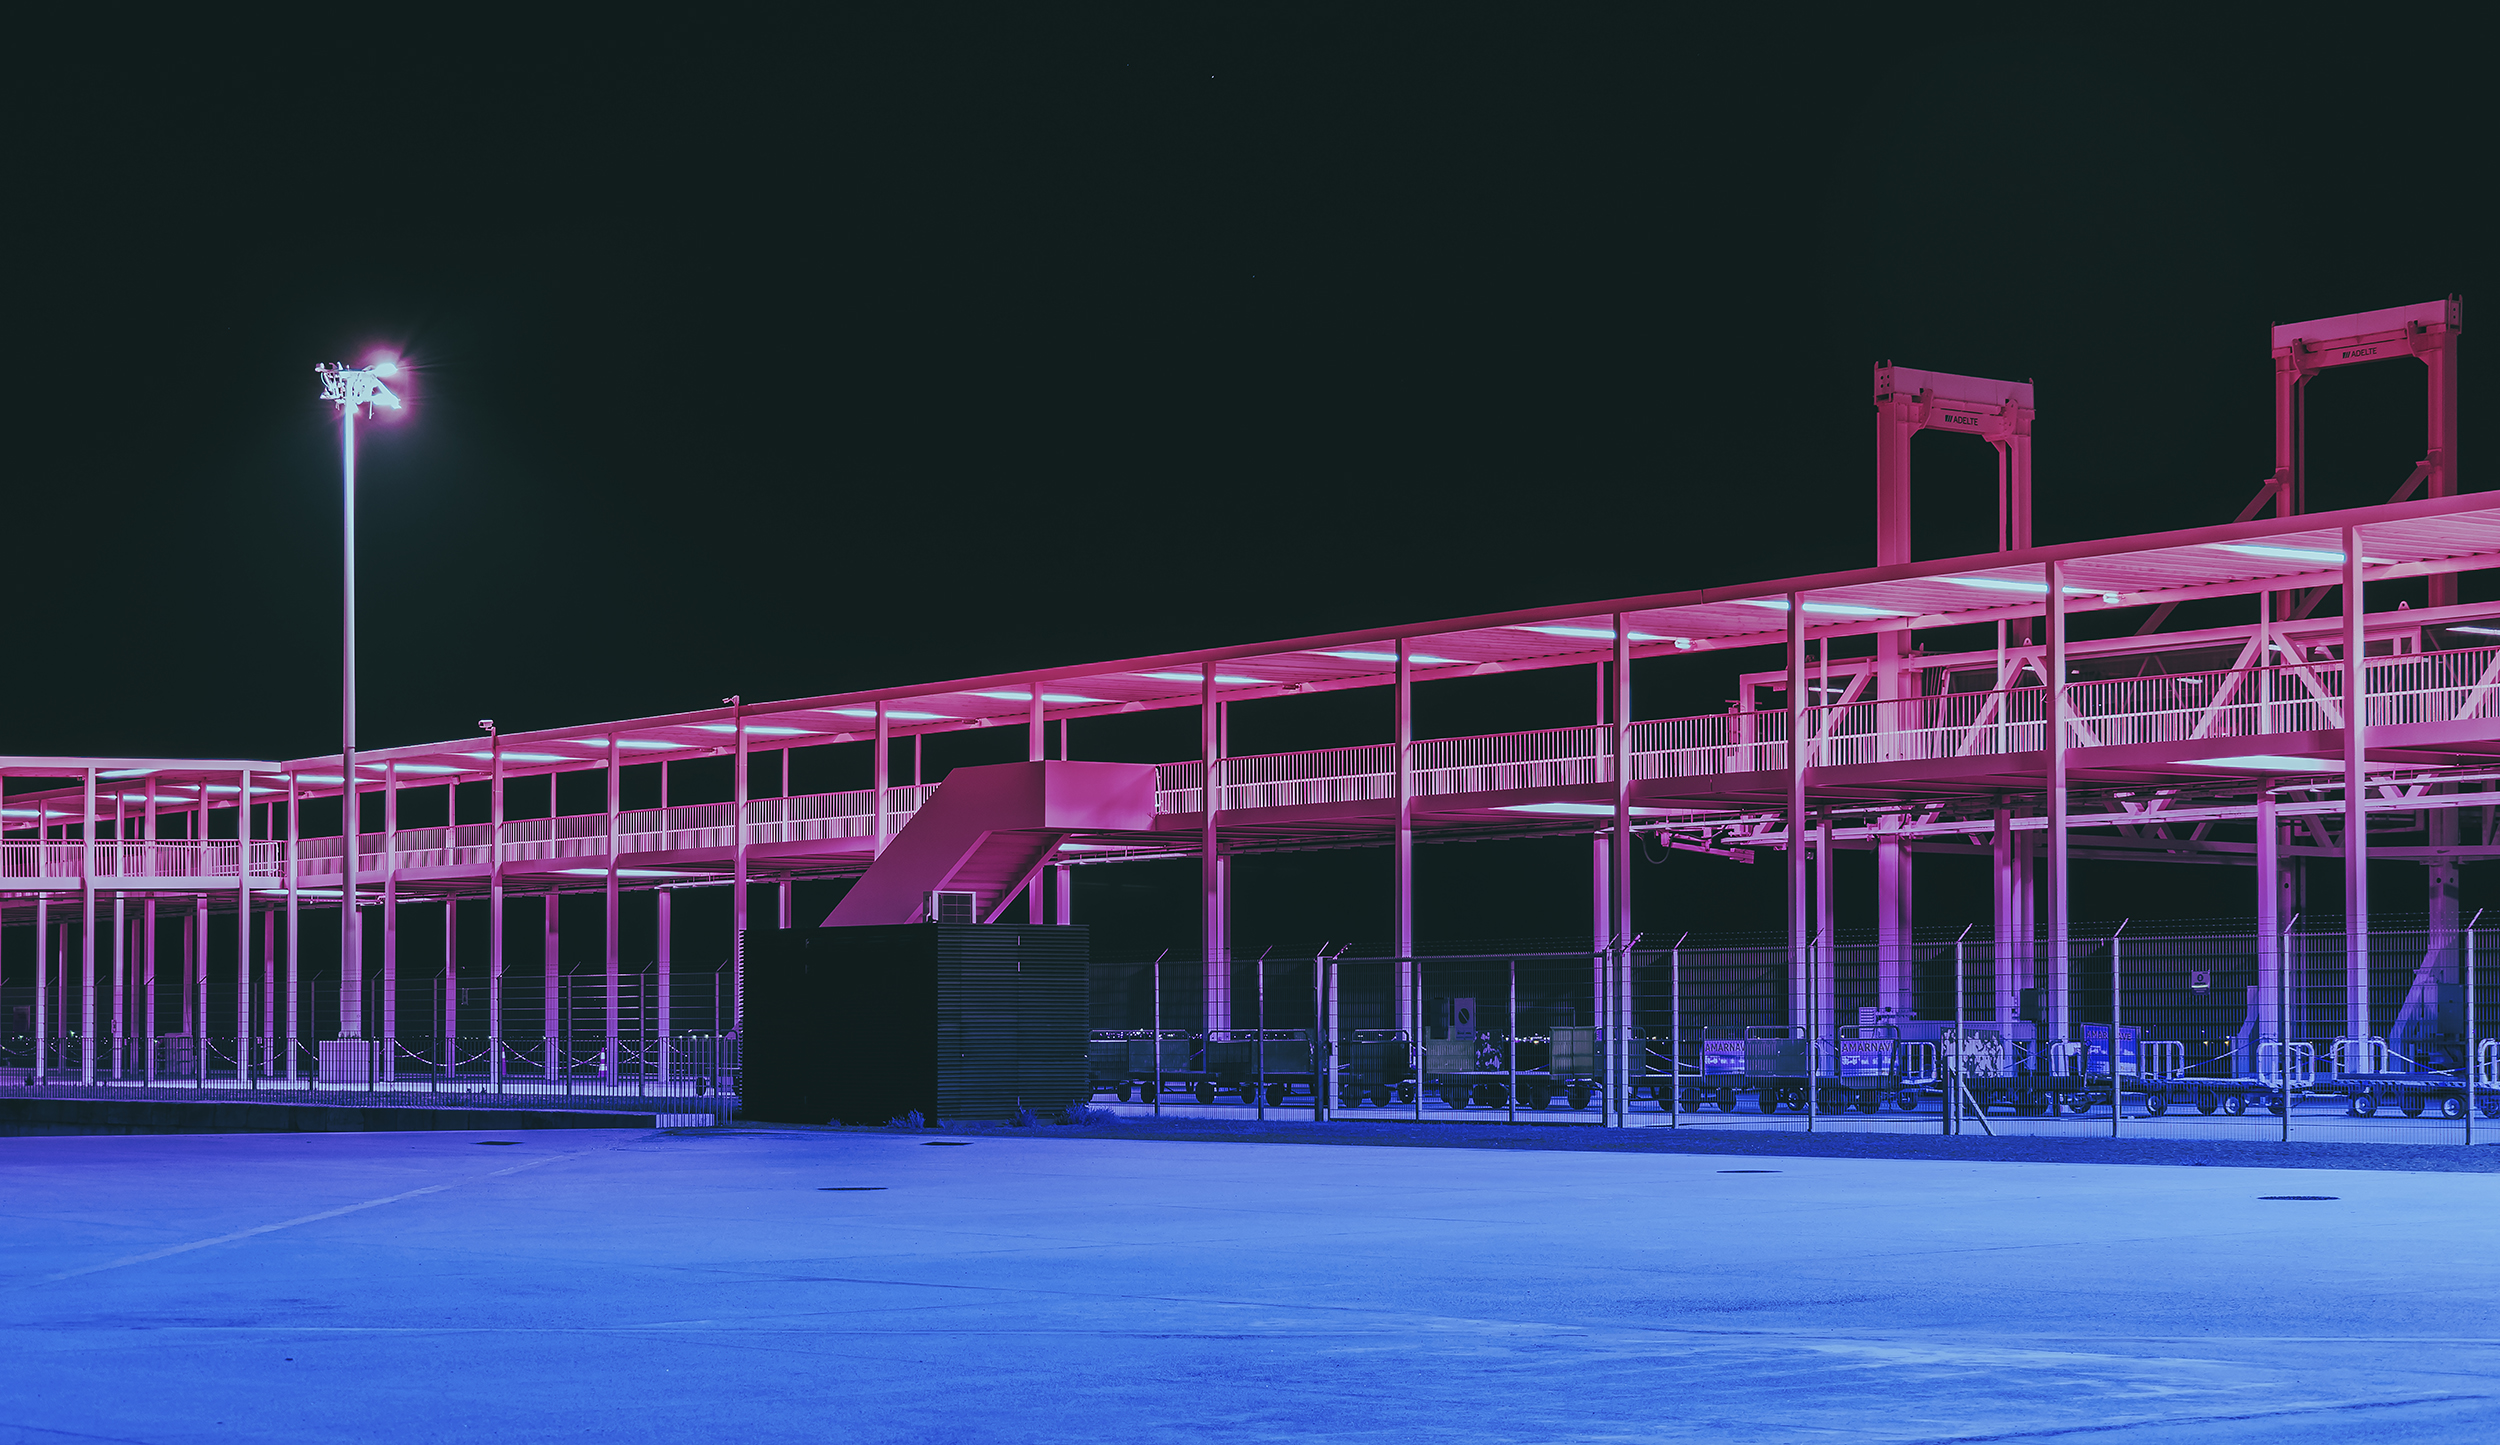 BA Photography work by Miguel Jones showcasing a colourful modern architectonic space at night